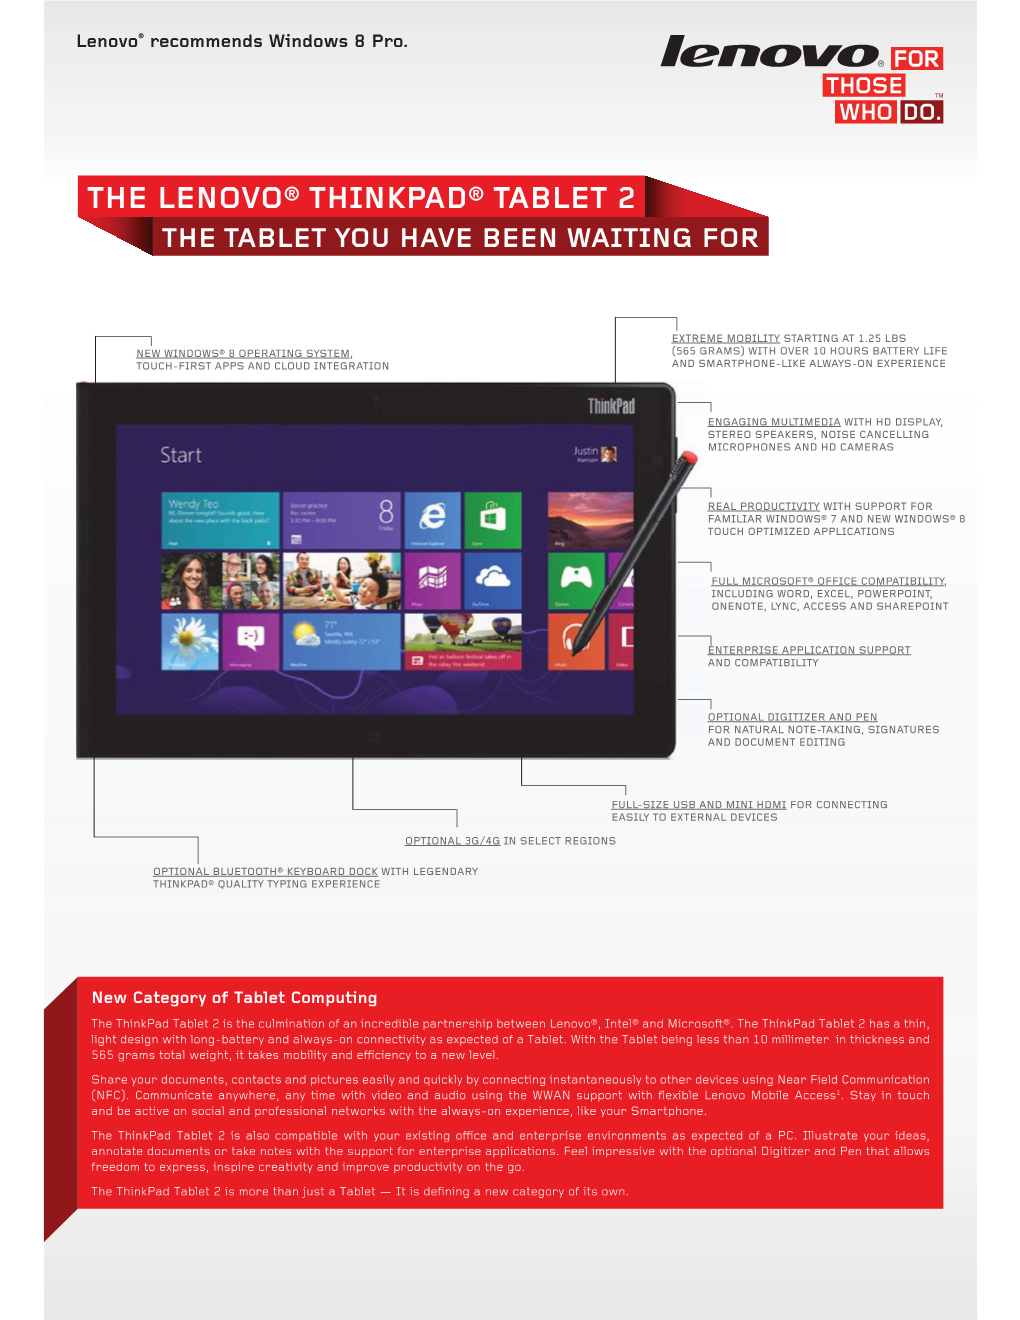 The Lenovo® Thinkpad® Tablet 2 the Tablet You Have Been Waiting For